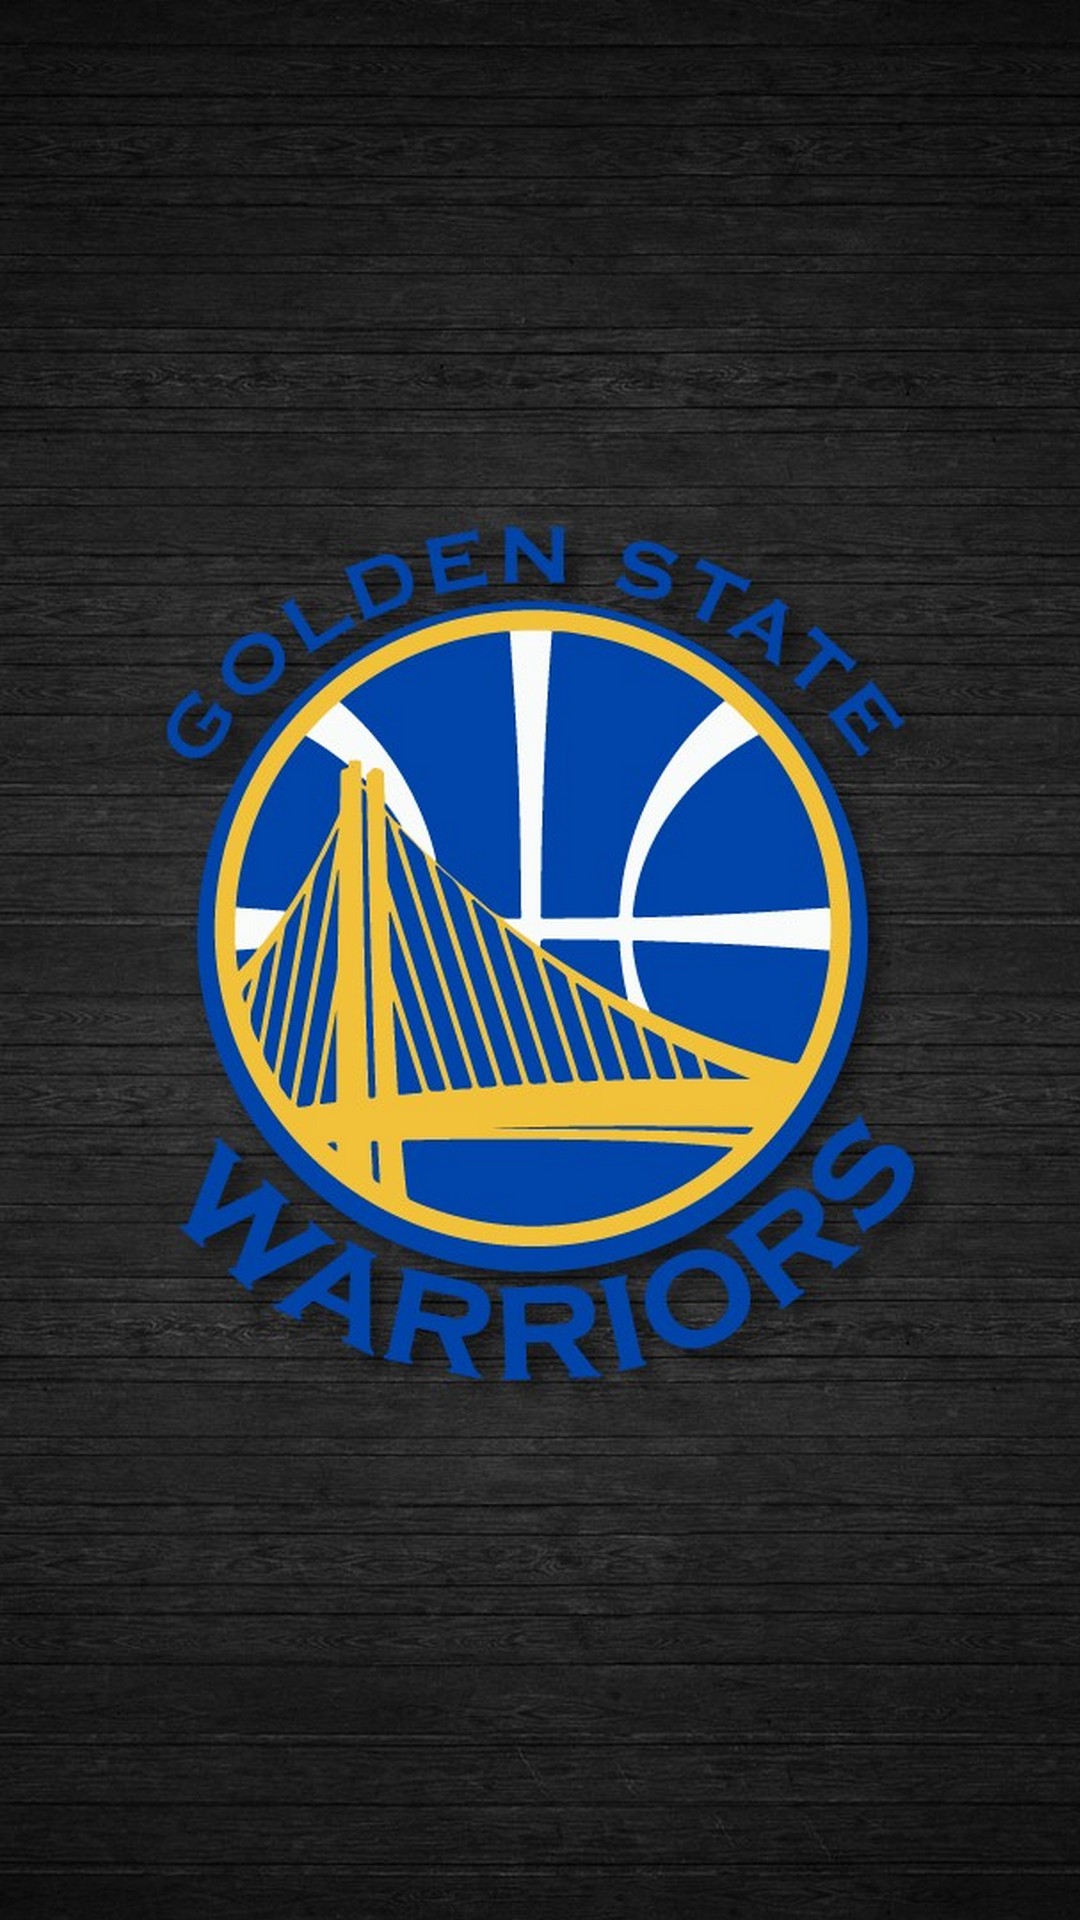 Mobile Wallpaper Golden State Warriors with image dimensions 1080X1920 pixel. You can make this wallpaper for your Desktop Computer Backgrounds, Windows or Mac Screensavers, iPhone Lock screen, Tablet or Android and another Mobile Phone device